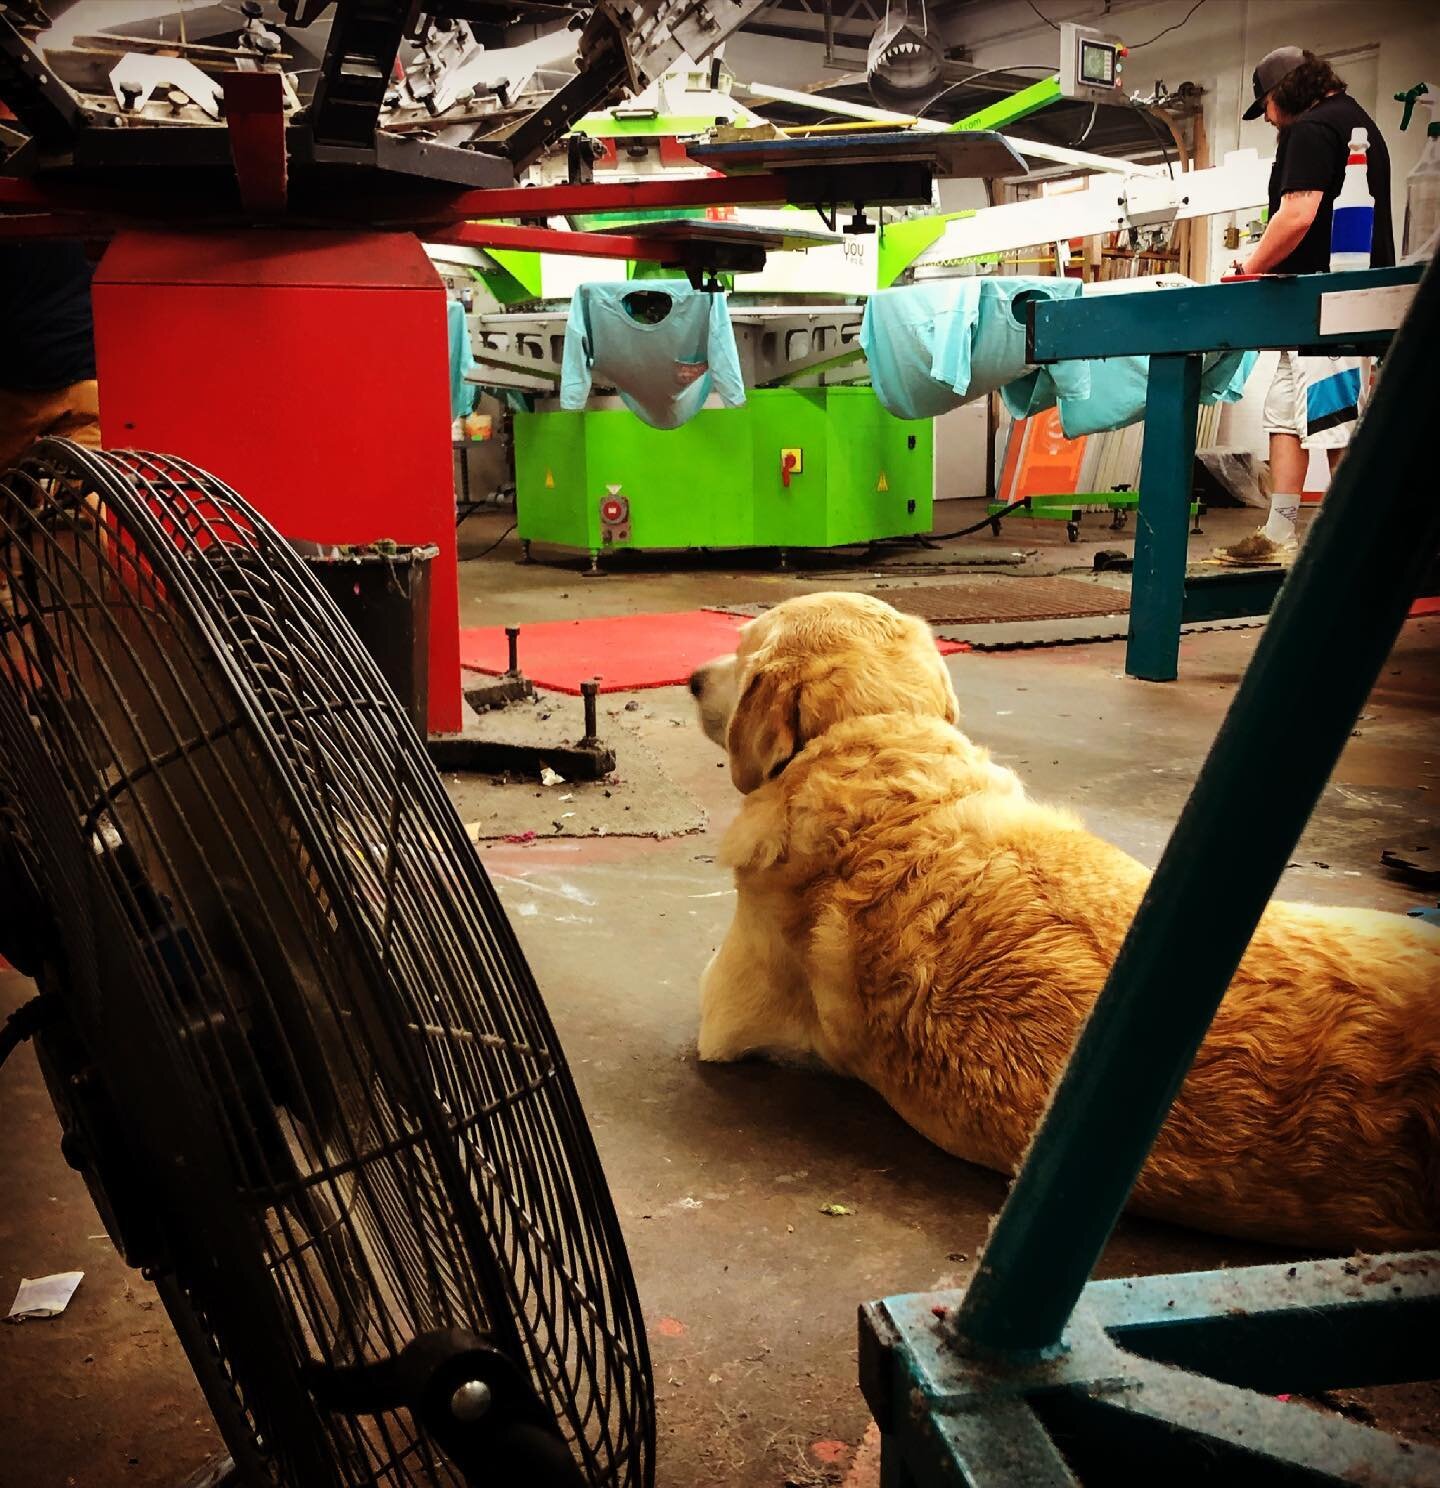 Supervisor dog @mac.theyellowlab enjoying the fan and cracking the whip on the guys! Already feels like the dog days of summer in the back of the shop #employeeofthemonth #6yearsrunning #shopdog